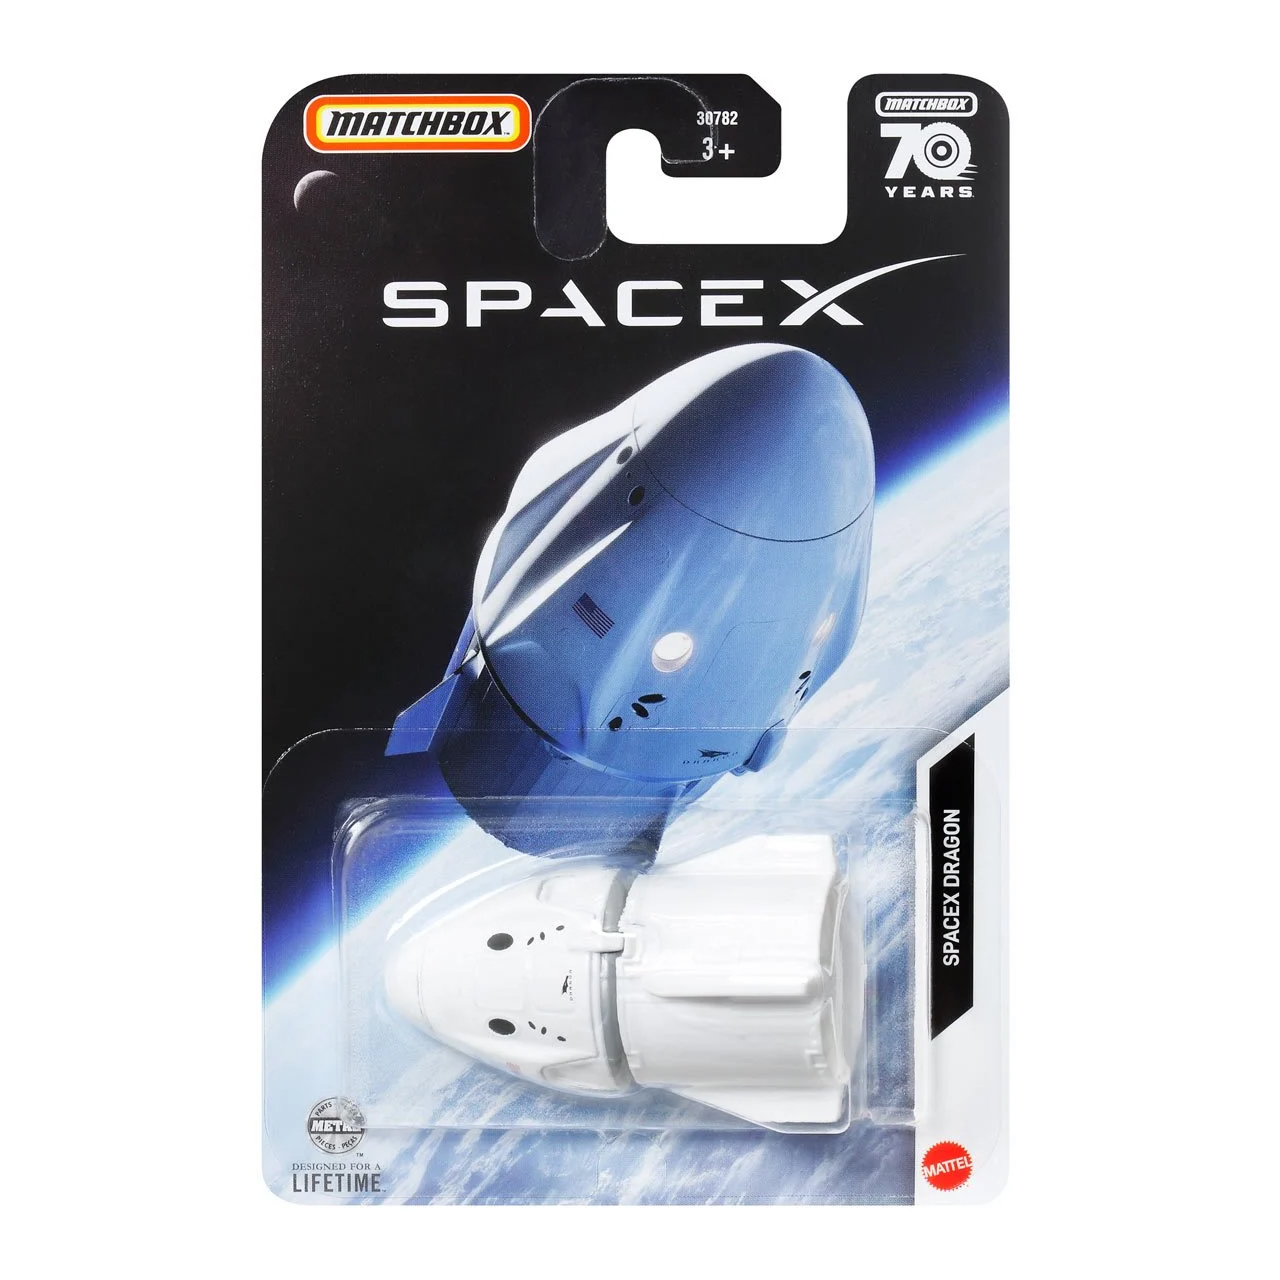 SpaceX's Dragon spacecraft with its expendable trunk module has been made into a Matchbox mainline die-cast toy.